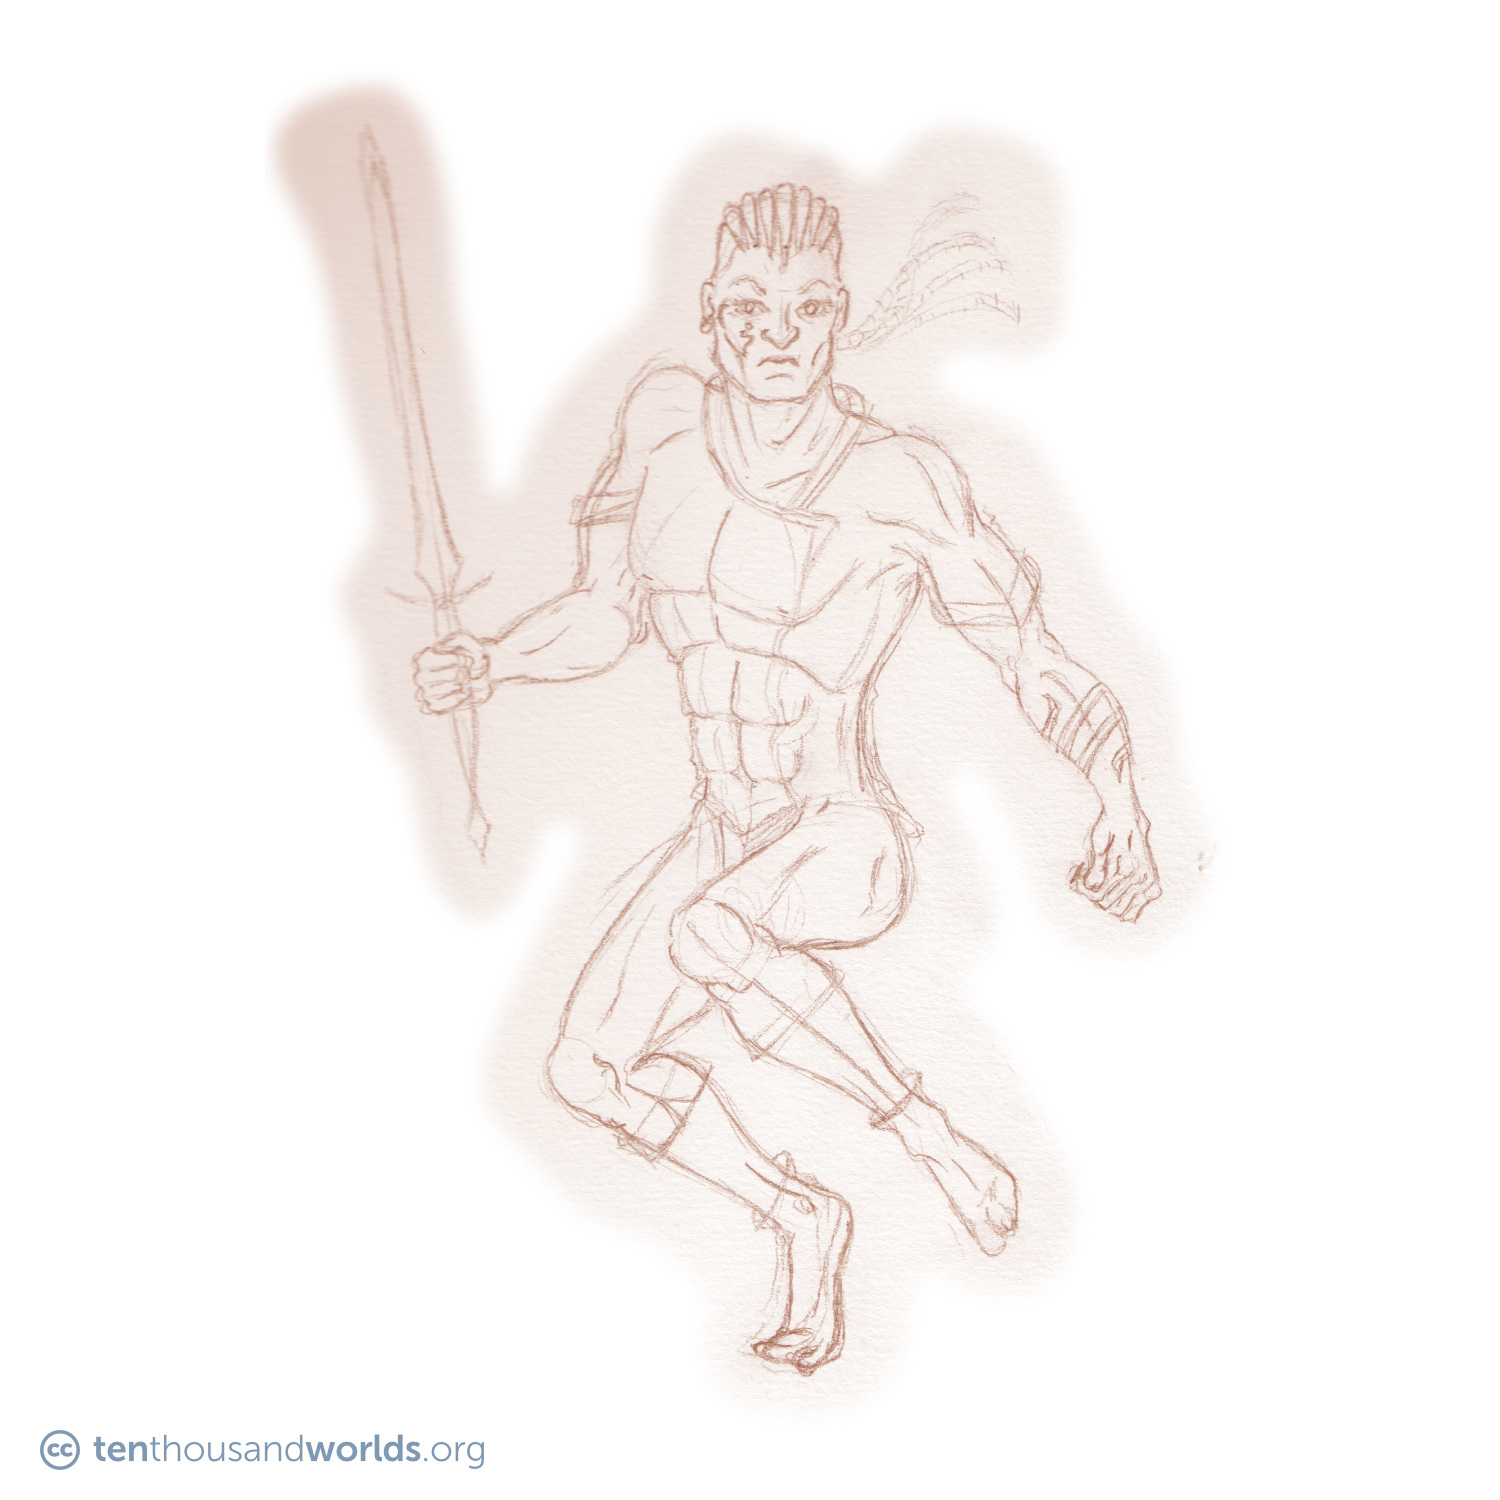 A pencil sketch of a man in mid-leap holding a sword. He wears knee-length trousers and an asymmetrical short-sleeved shirt. He has facial and forearm tattoos, the sides of his head are shaved, and the rest of his hair is styled into long braids which fly out behind him.